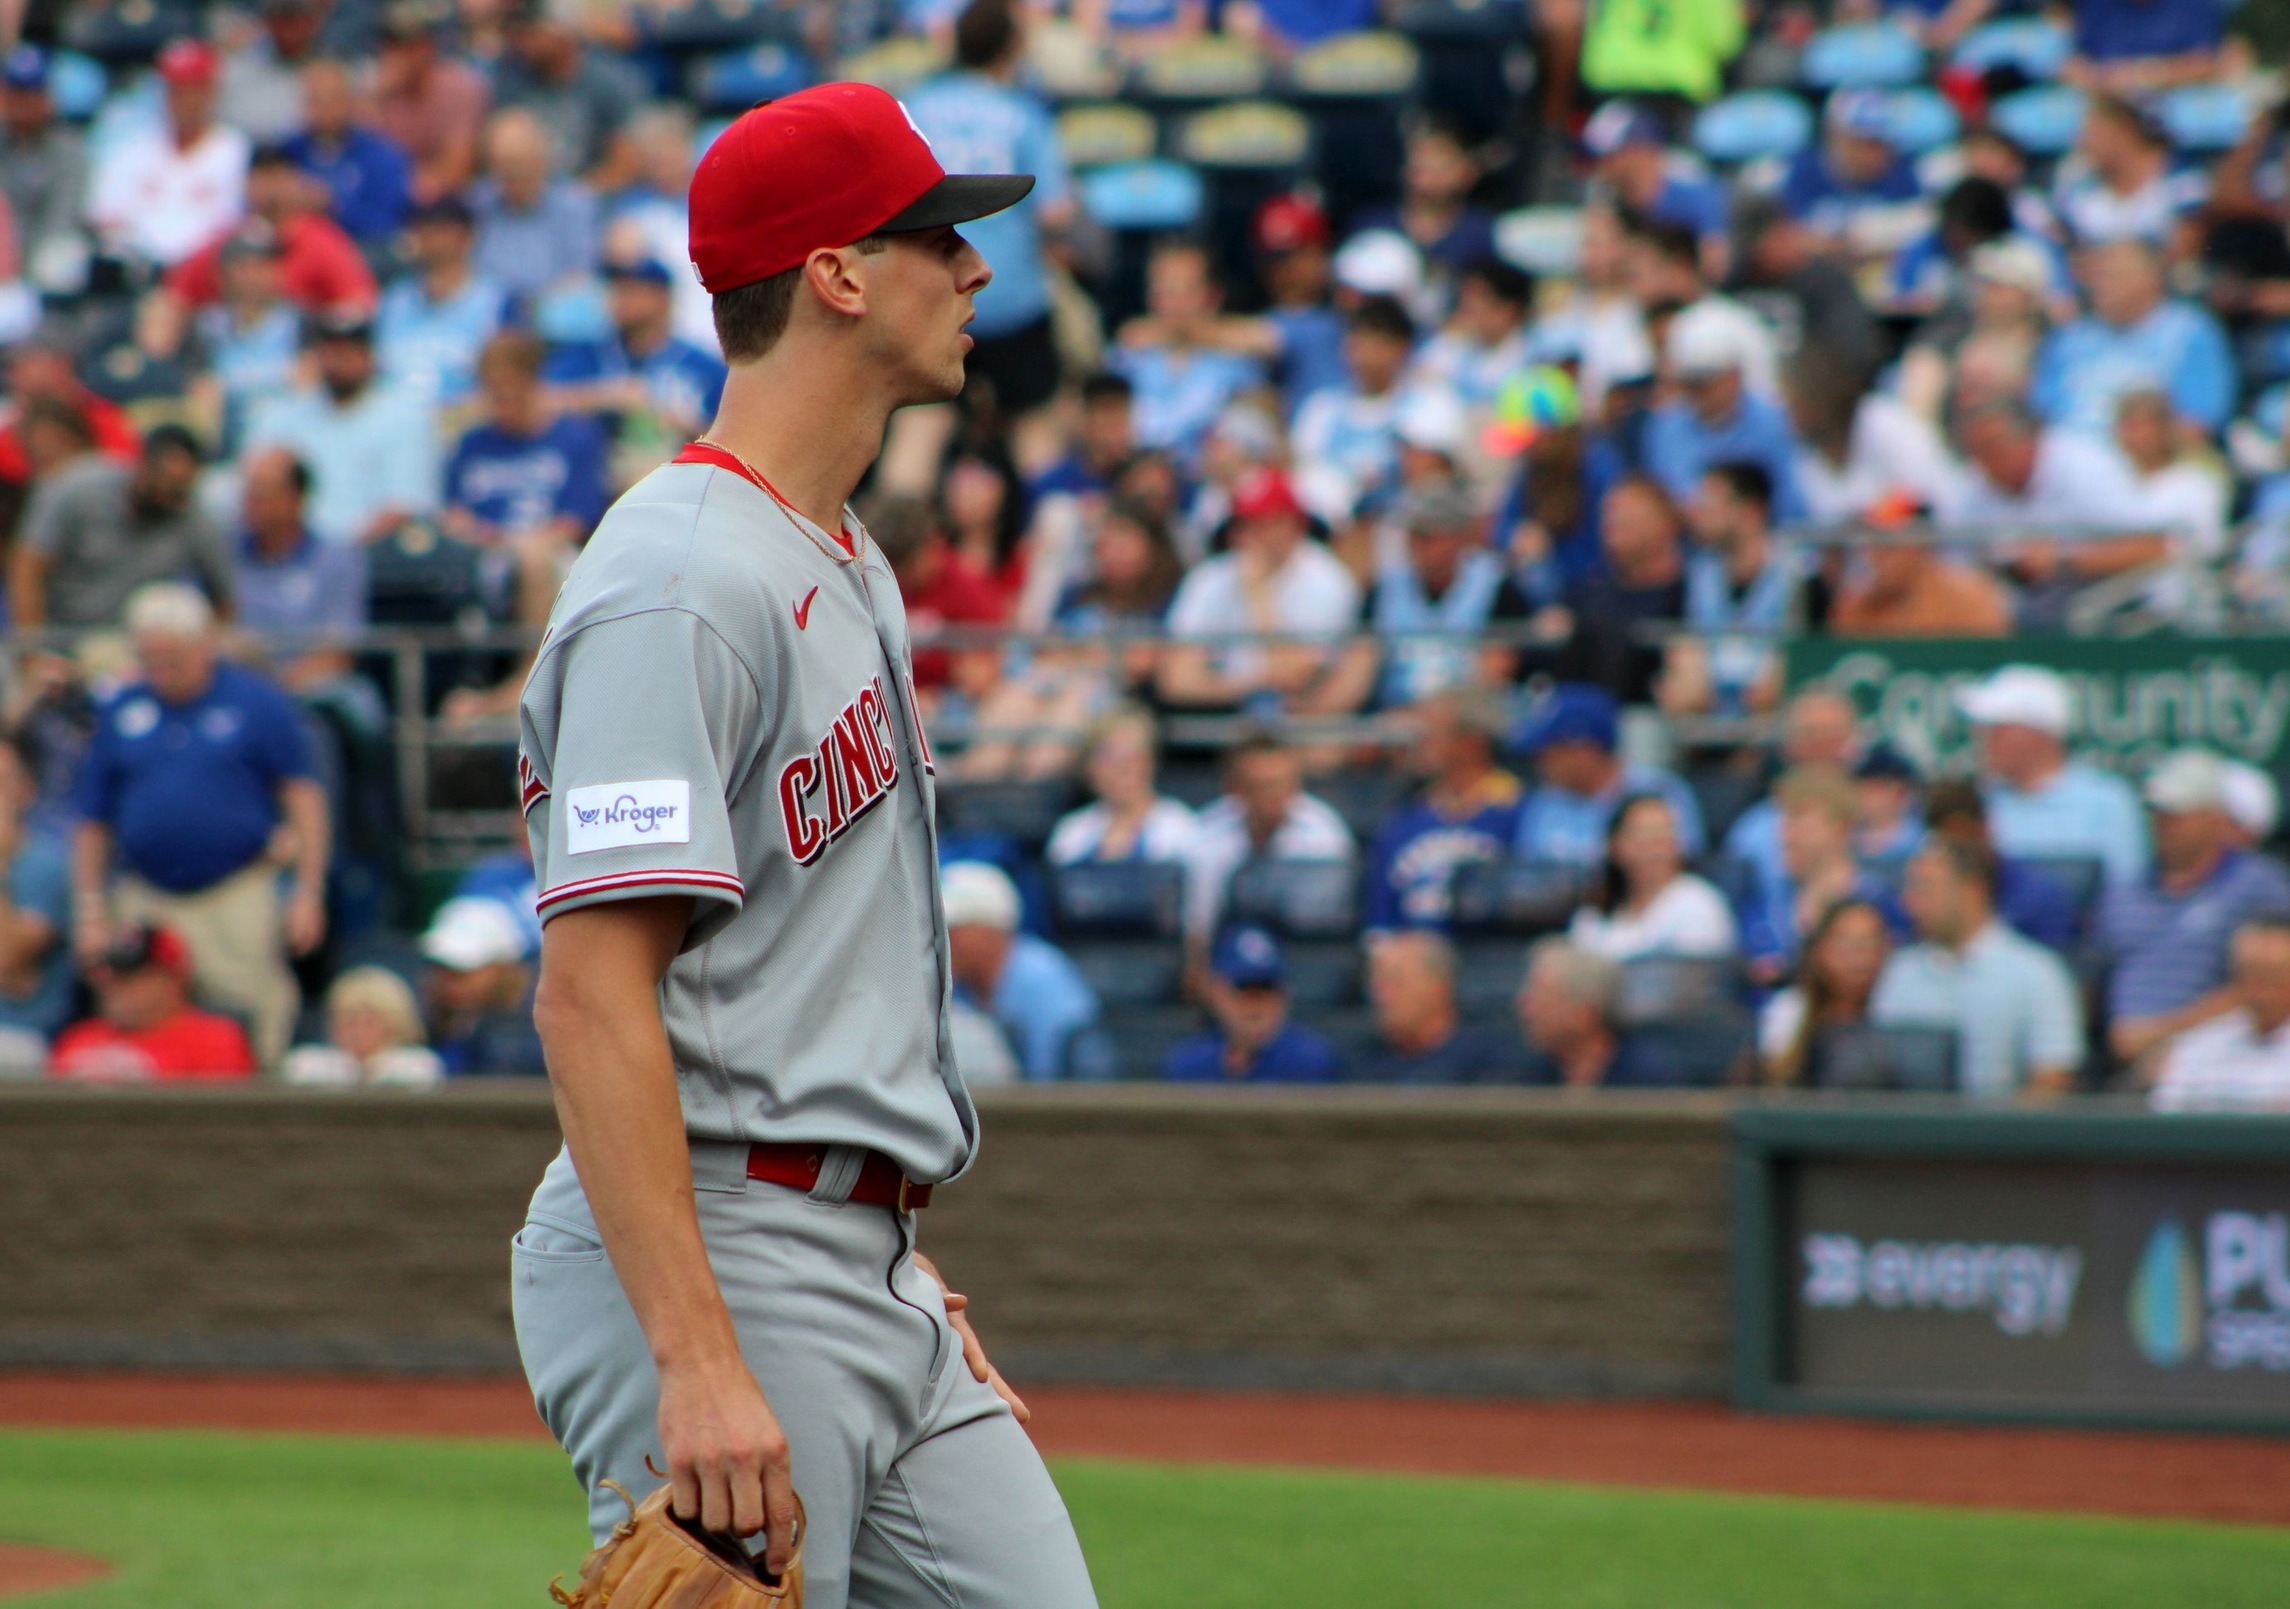 The Reds' Brandon Williamson walks off the mound during his outing against the Kansas City Royals on June 13.